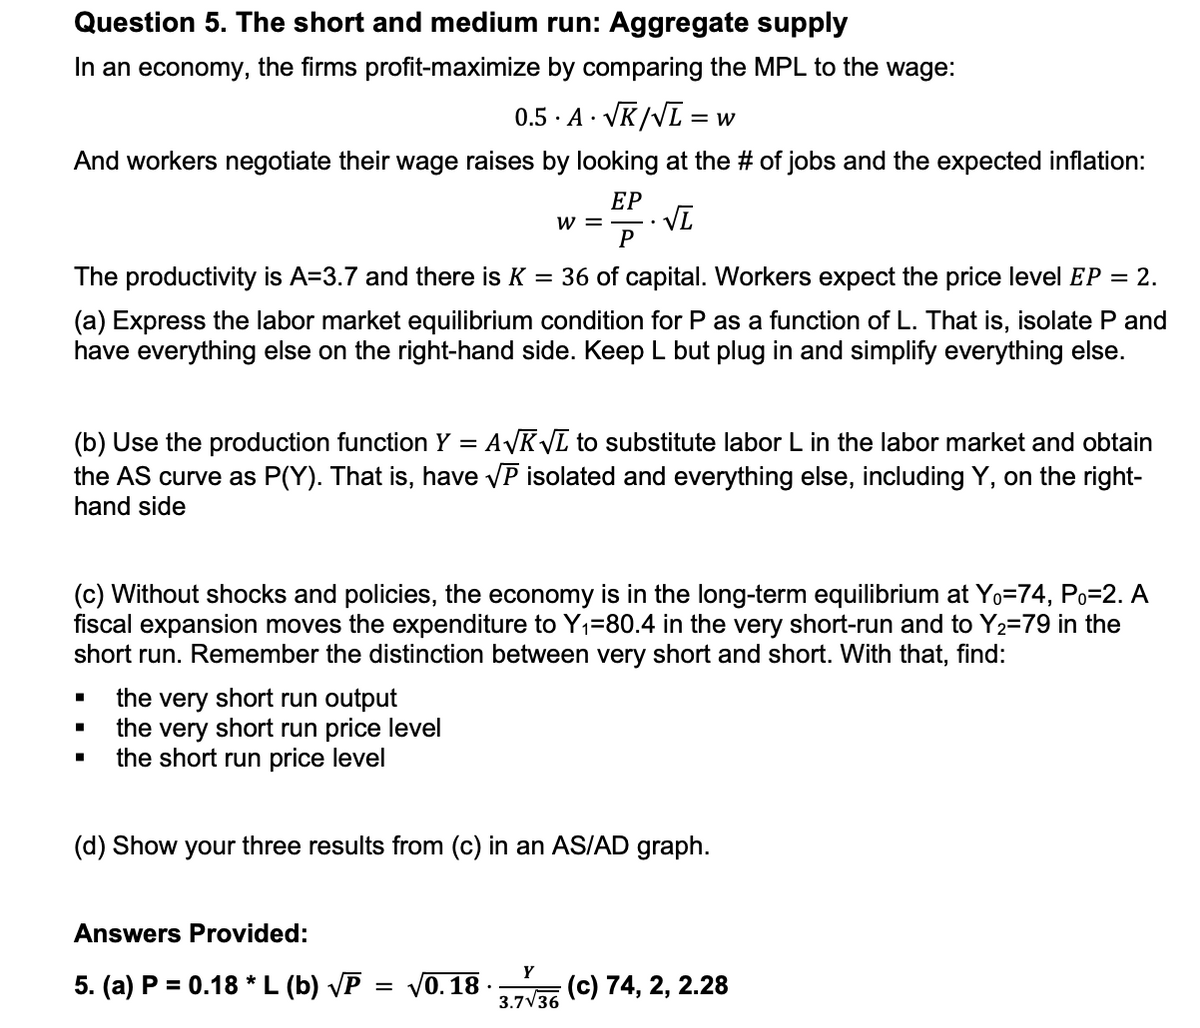 Question 5. The short and medium run: Aggregate supply
In an economy, the firms profit-maximize by comparing the MPL to the wage:
0.5 A √K/√L = w
And workers negotiate their wage raises by looking at the # of jobs and the expected inflation:
EP
√L
P
The productivity is A=3.7 and there is K = 36 of capital. Workers expect the price level EP = 2.
(a) Express the labor market equilibrium condition for P as a function of L. That is, isolate P and
have everything else on the right-hand side. Keep L but plug in and simplify everything else.
W =
(b) Use the production function Y = A√K√L to substitute labor L in the labor market and obtain
the AS curve as P(Y). That is, have √P isolated and everything else, including Y, on the right-
hand side
(c) Without shocks and policies, the economy is in the long-term equilibrium at Yo=74, Po=2. A
fiscal expansion moves the expenditure to Y₁=80.4 in the very short-run and to Y₂=79 in the
short run. Remember the distinction between very short and short. With that, find:
the very short run output
the very short run price level
the short run price level
(d) Show your three results from (c) in an AS/AD graph.
Answers Provided:
5. (a) P = 0.18 * L (b) √P √0. 18.
Y
3.7√36
(c) 74, 2, 2.28